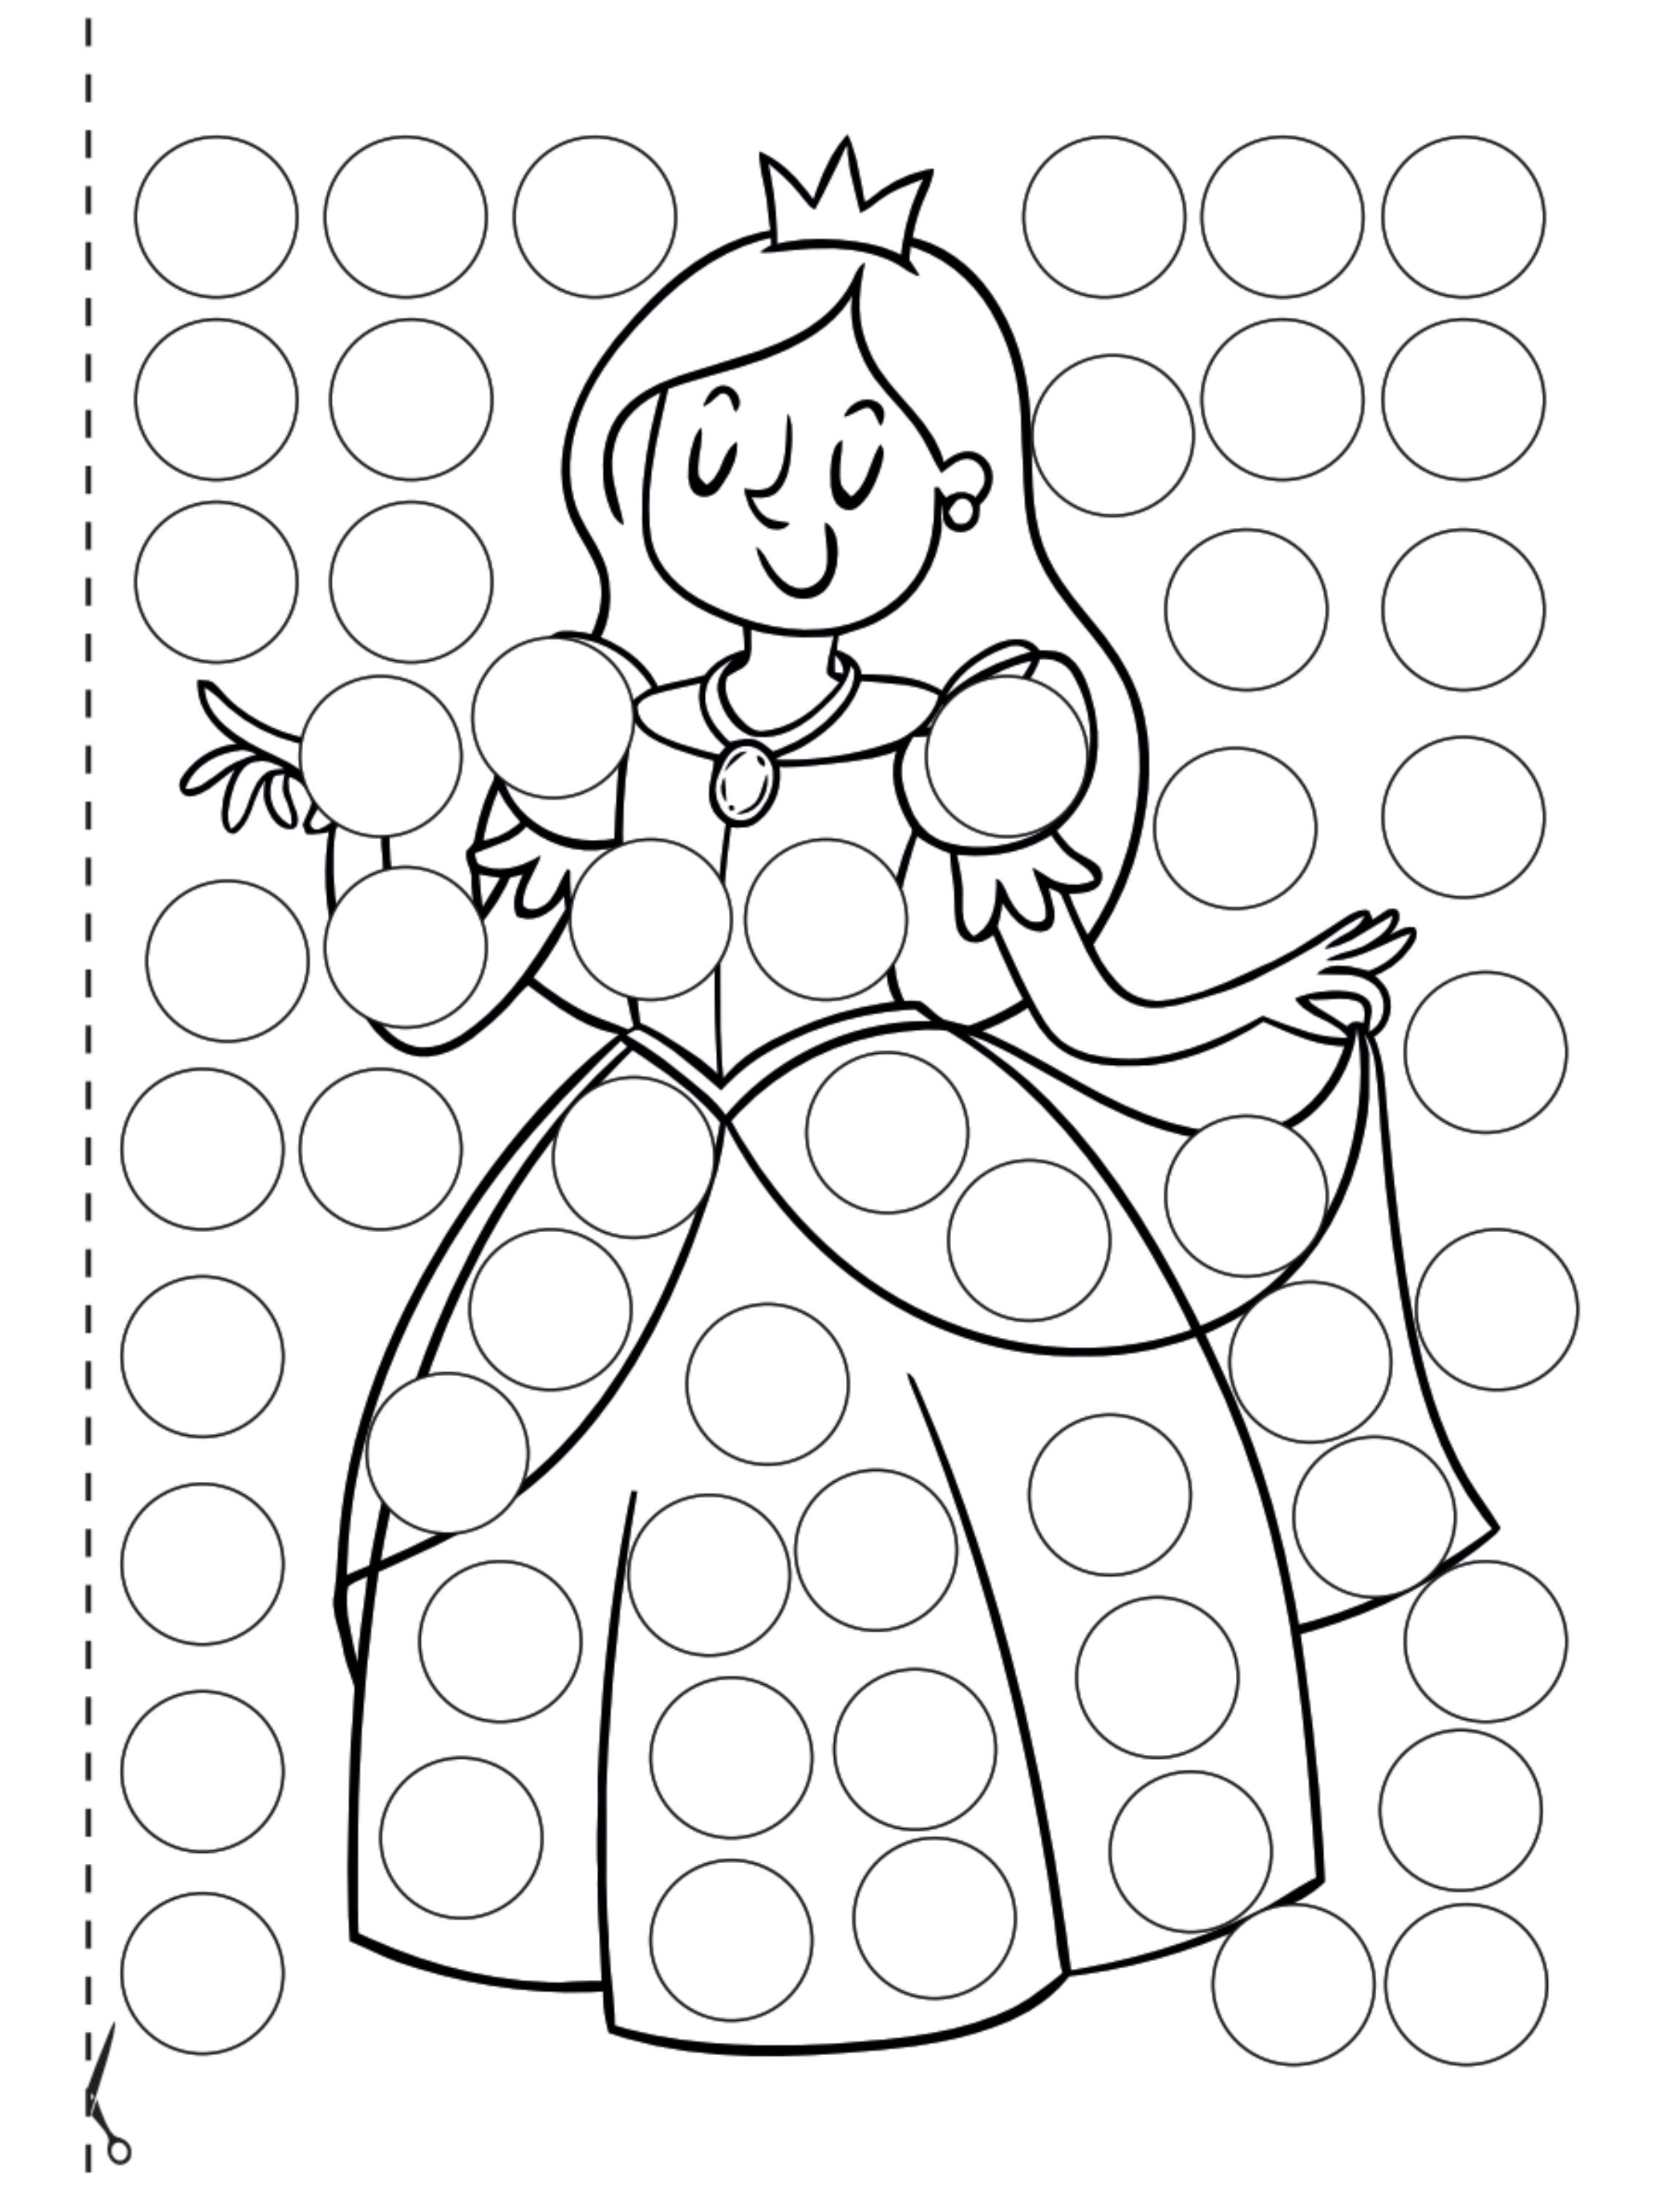  Coloring Books for Kids – Dot A Dot Art Activity Book for Girls  and Toddlers Picture Me a Princess : Toys & Games